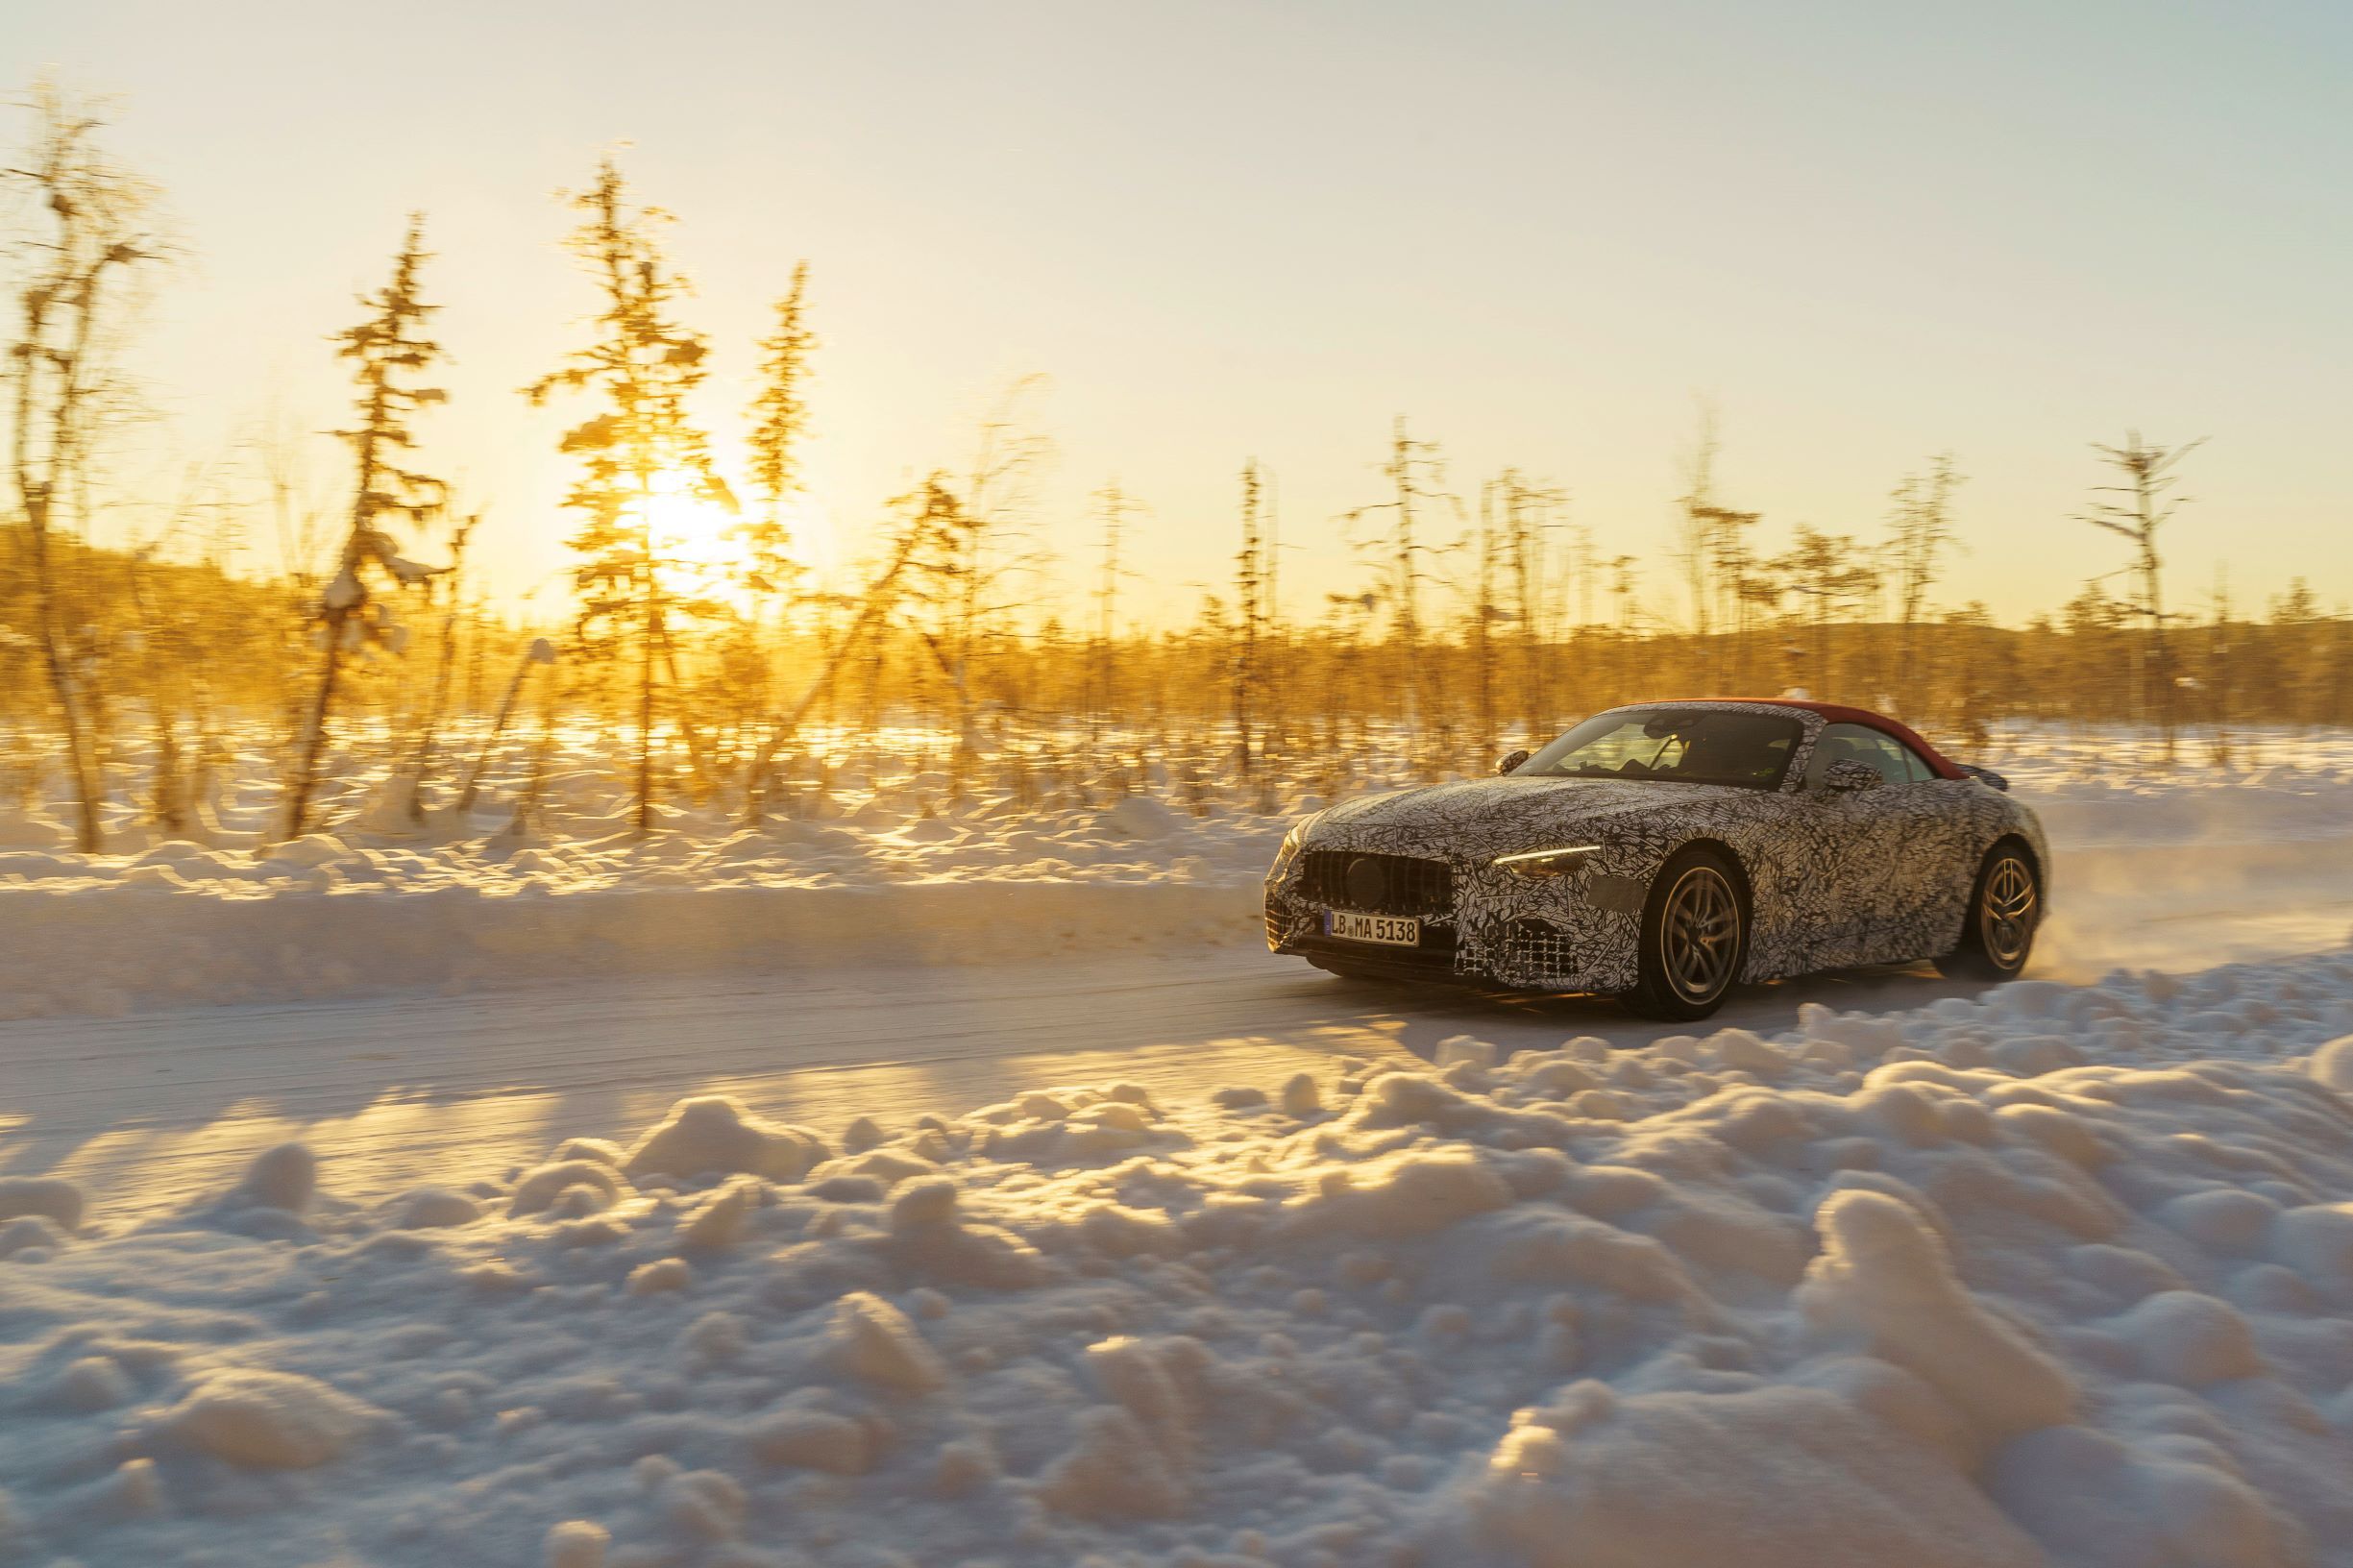 An Image Of A Mercedes-AMG SL In Snow